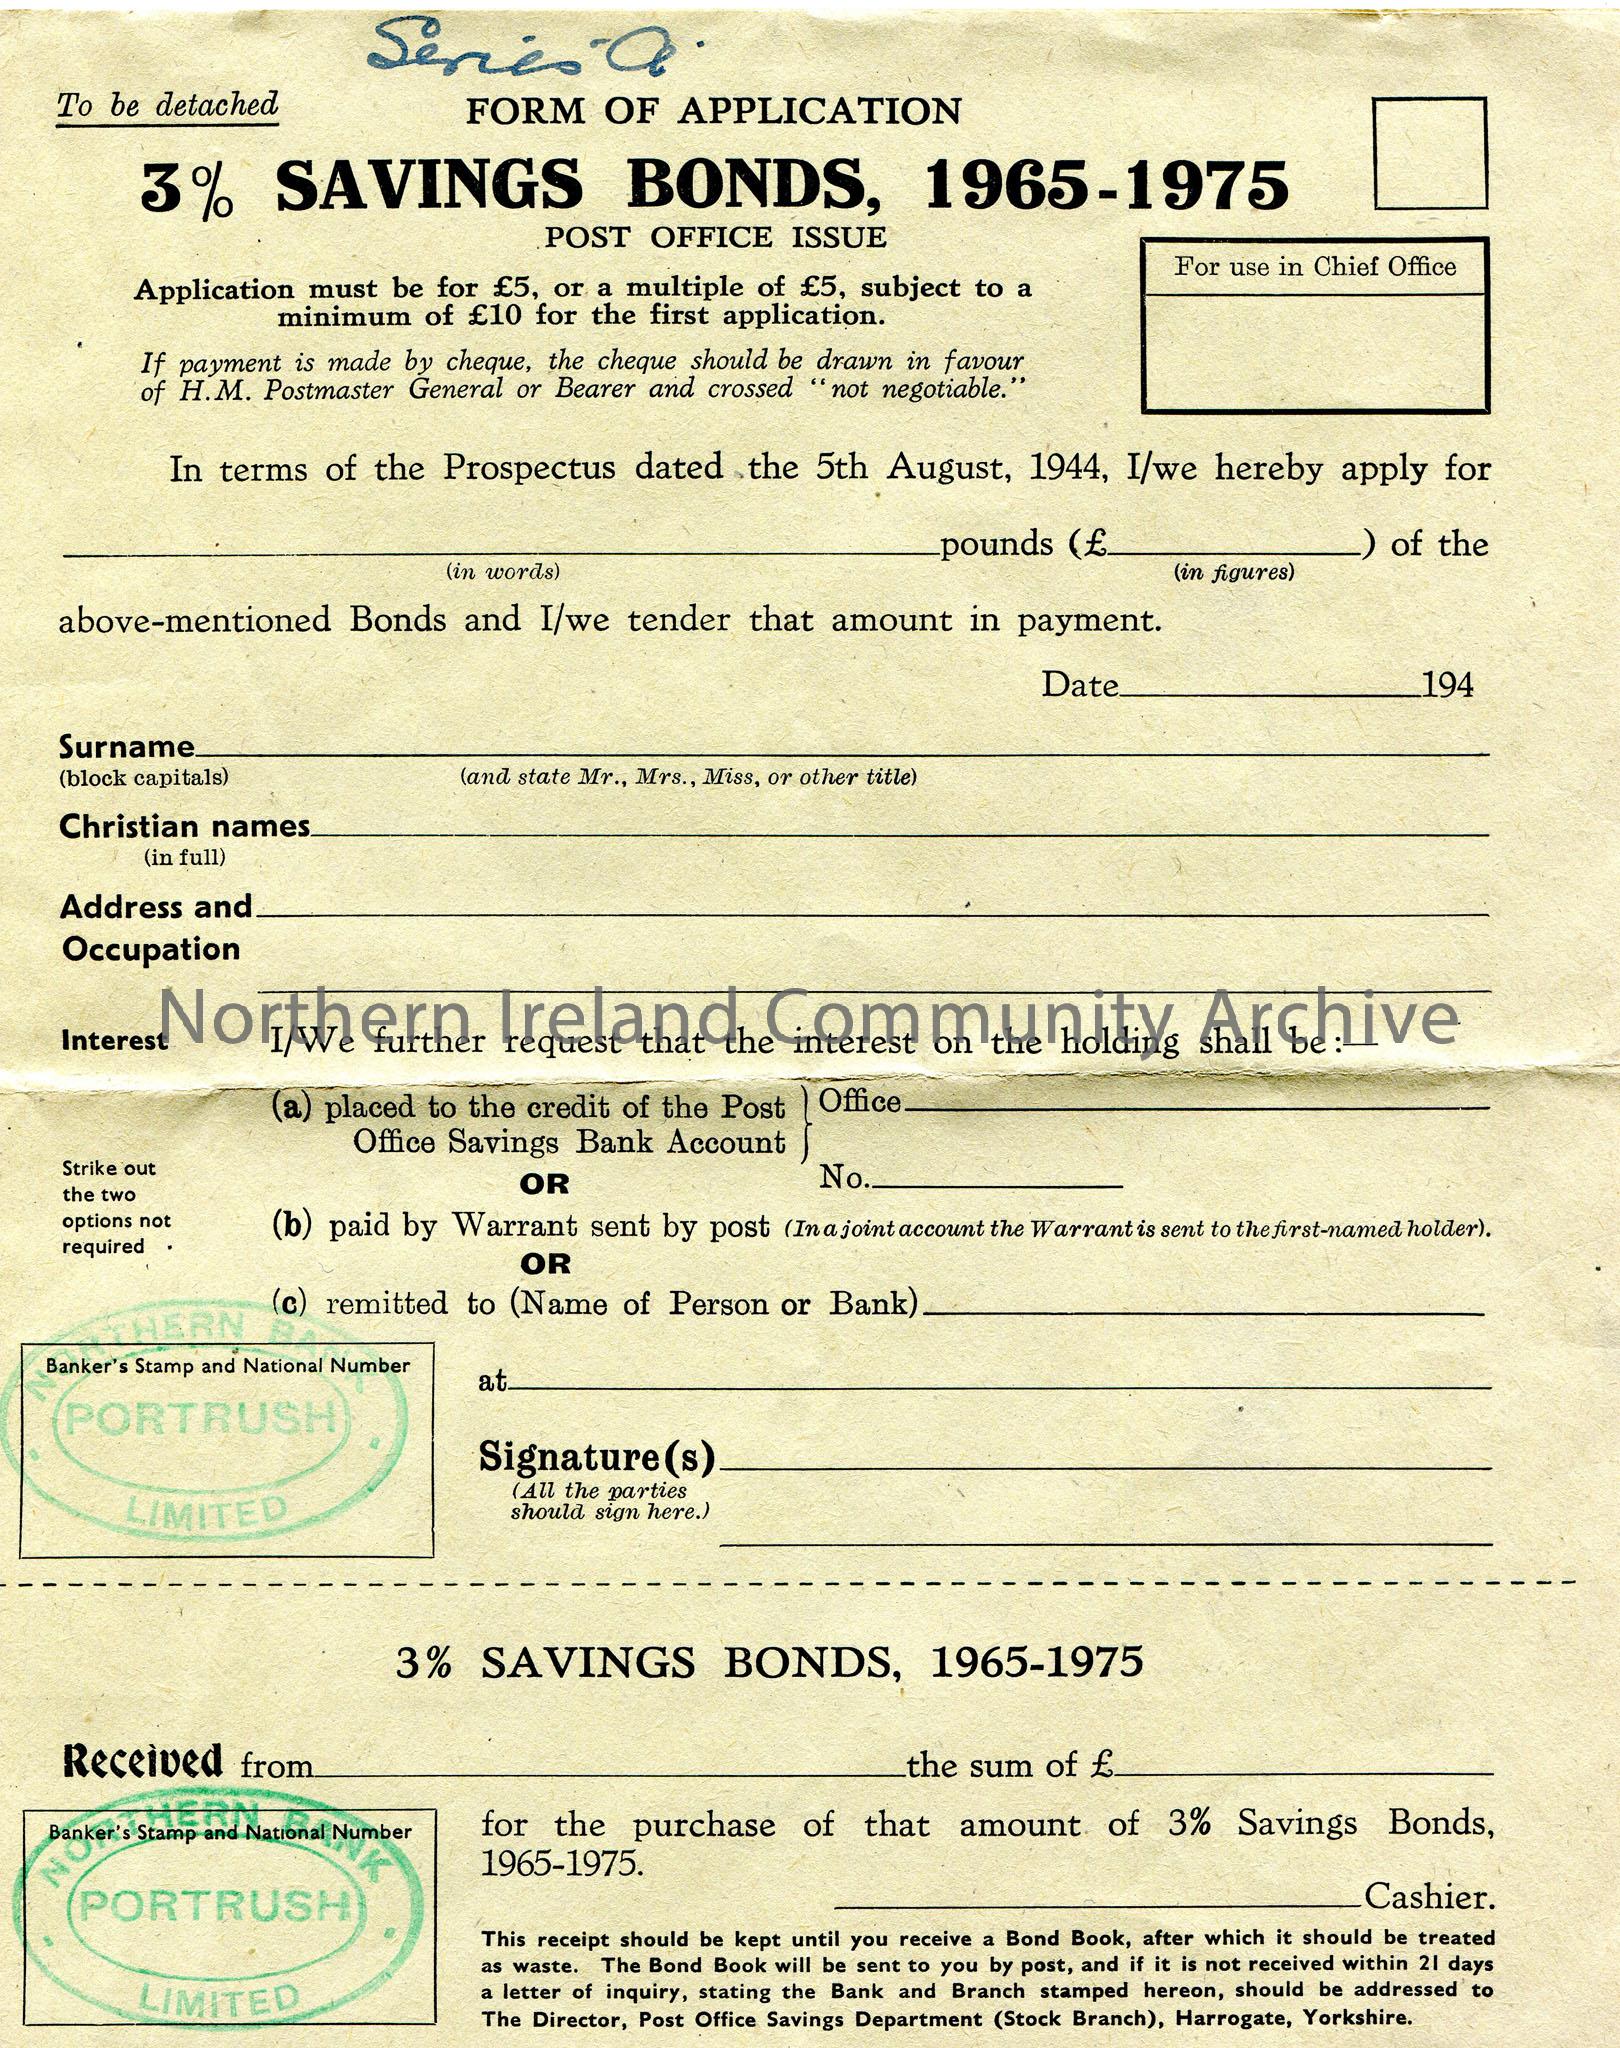 Application form, booklet, for 3% Savings Bonds 1965-1975, Post Office Issue. Stamped by Northern Bank, Portrush. ‘Series A’ handwritten on top of pag… – scan218c